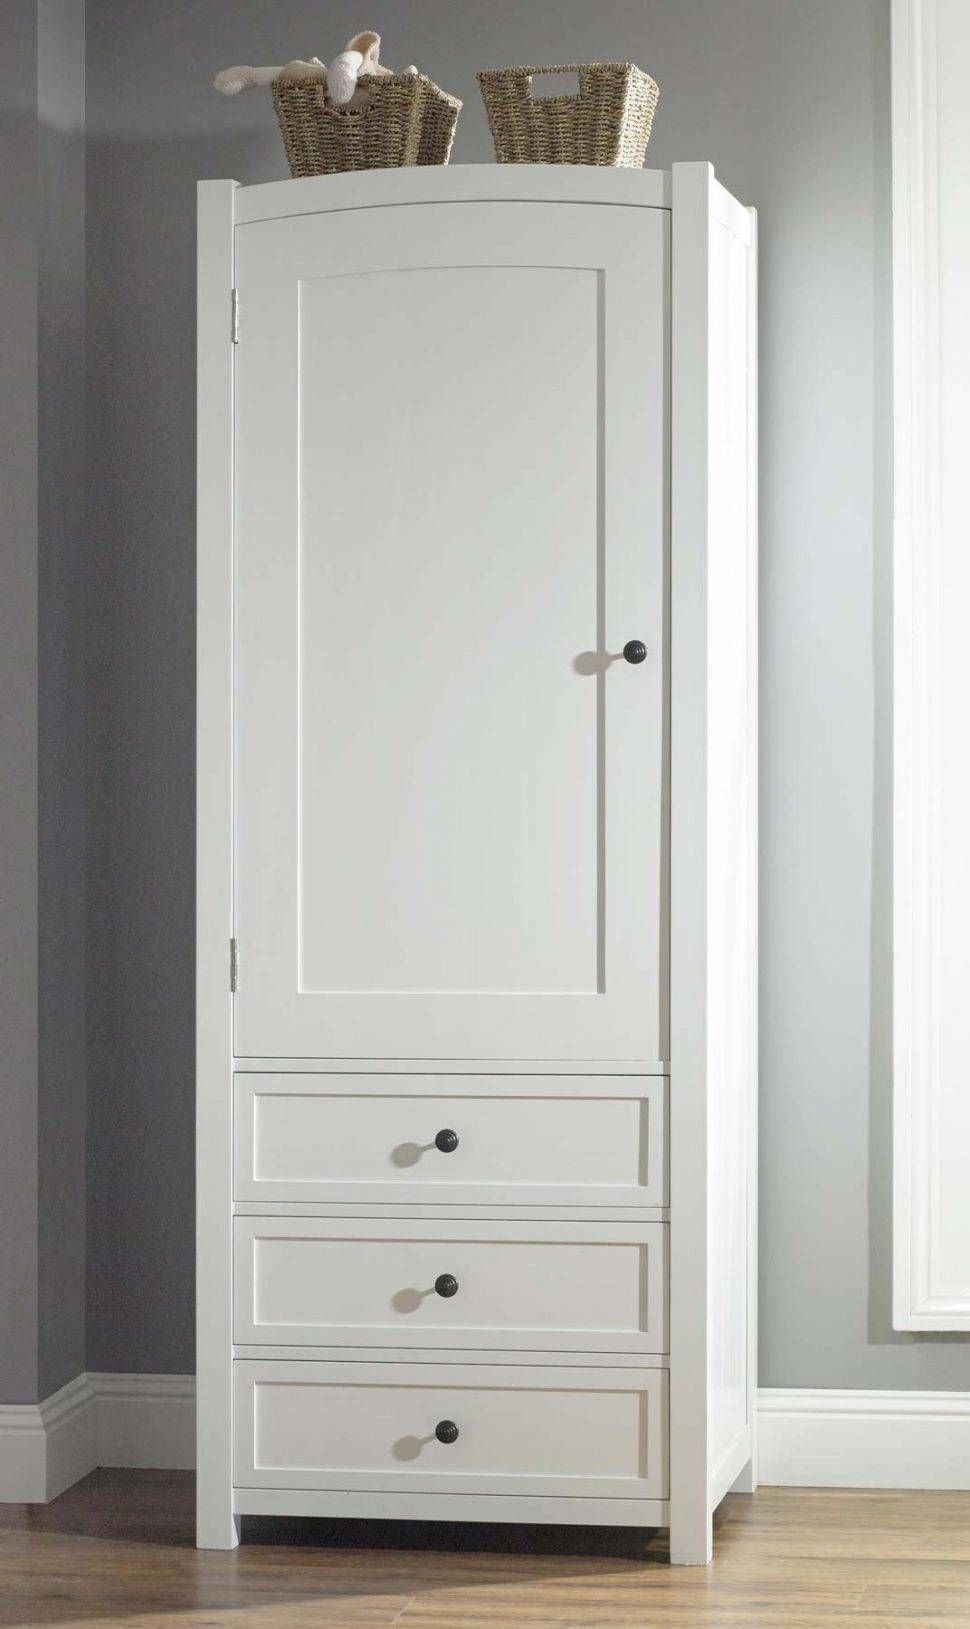 Wardrobe : 39 Formidable White Wooden Wardrobe With Drawers Photo Pertaining To Large White Wardrobes With Drawers (Photo 10 of 15)